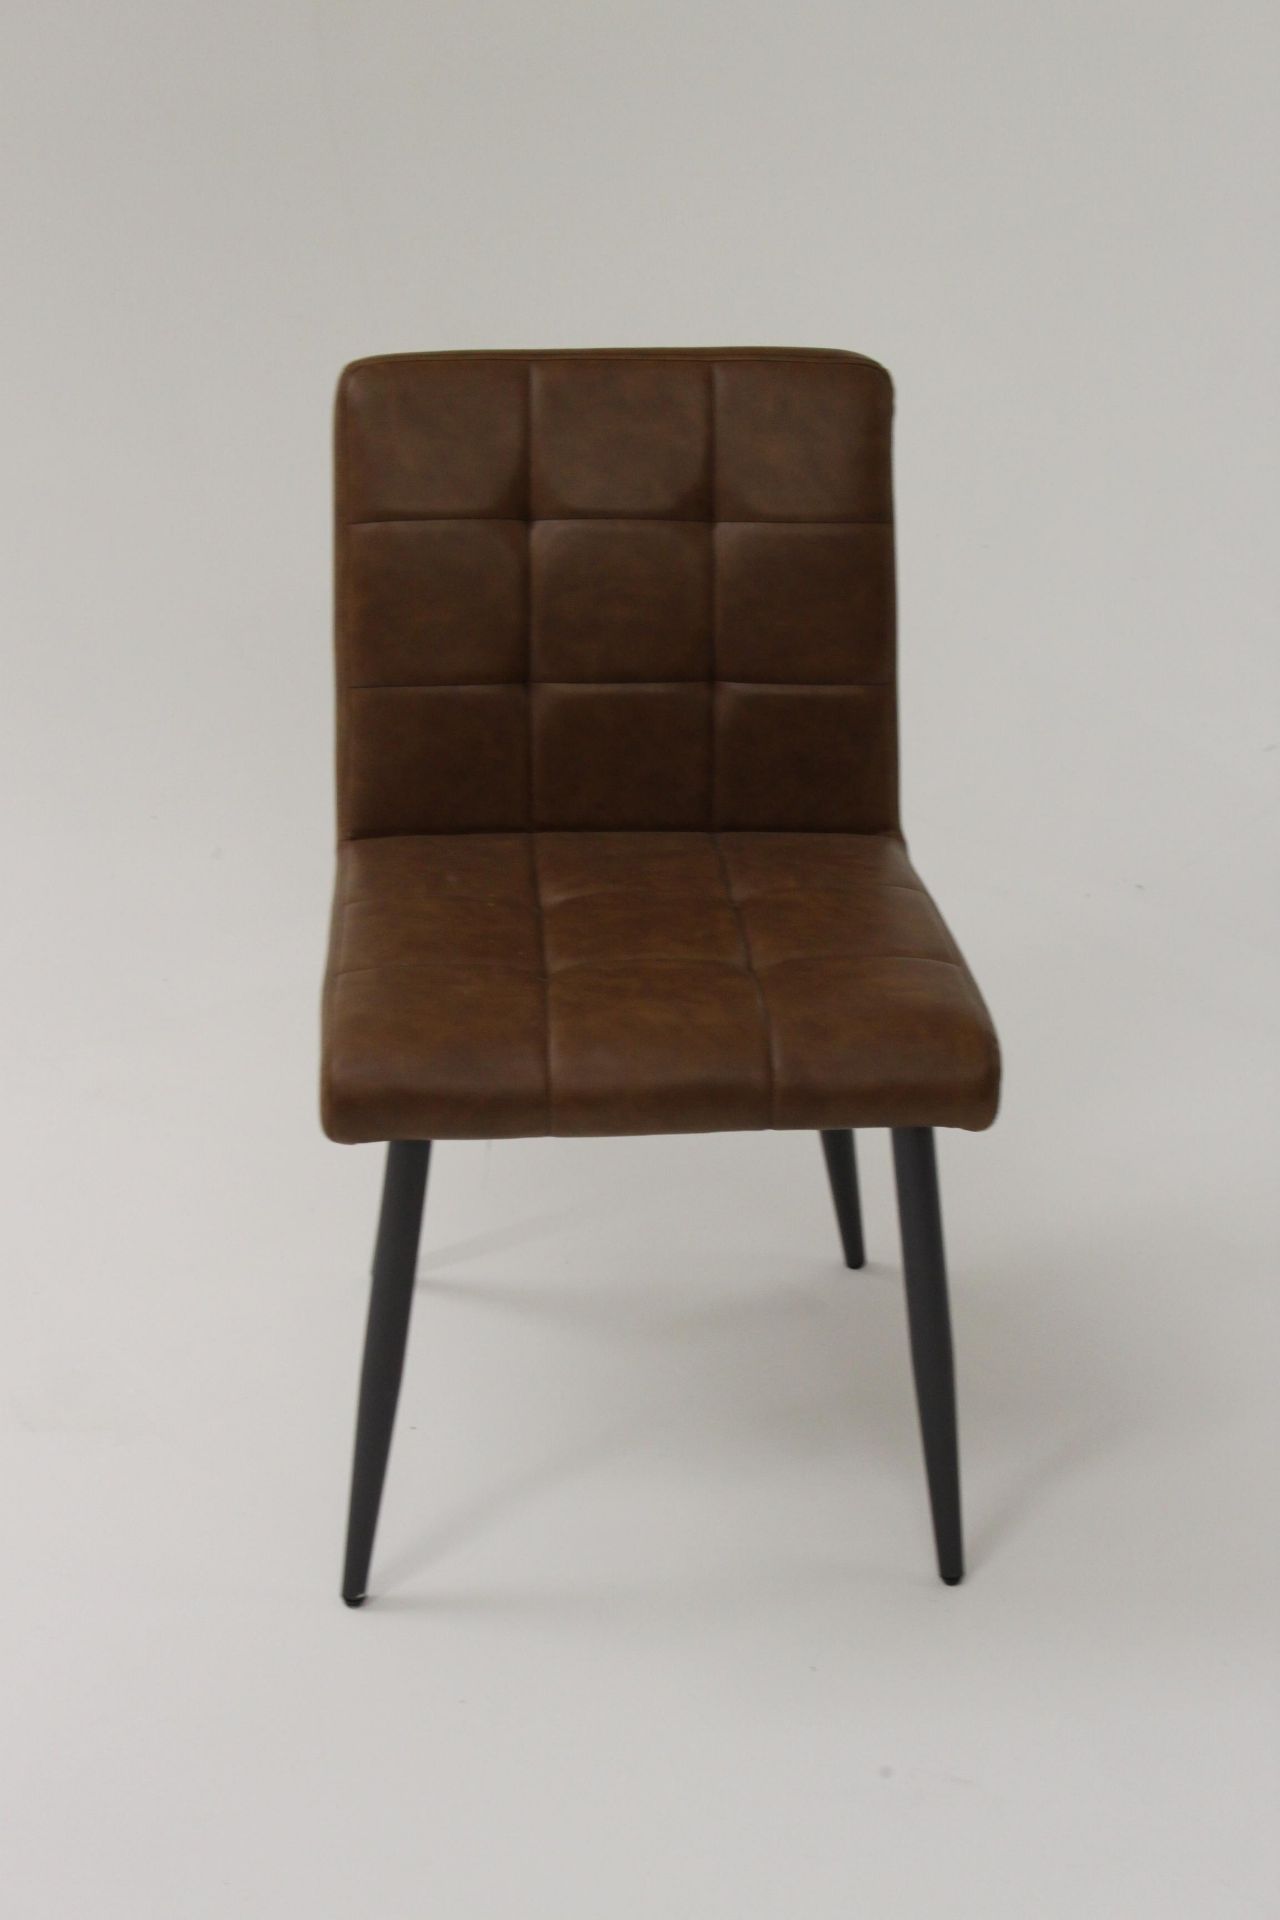 Barca Dining Chair Vegan Leather Tan With Cushioned And Tufted Upholstery Four Round And Tapered